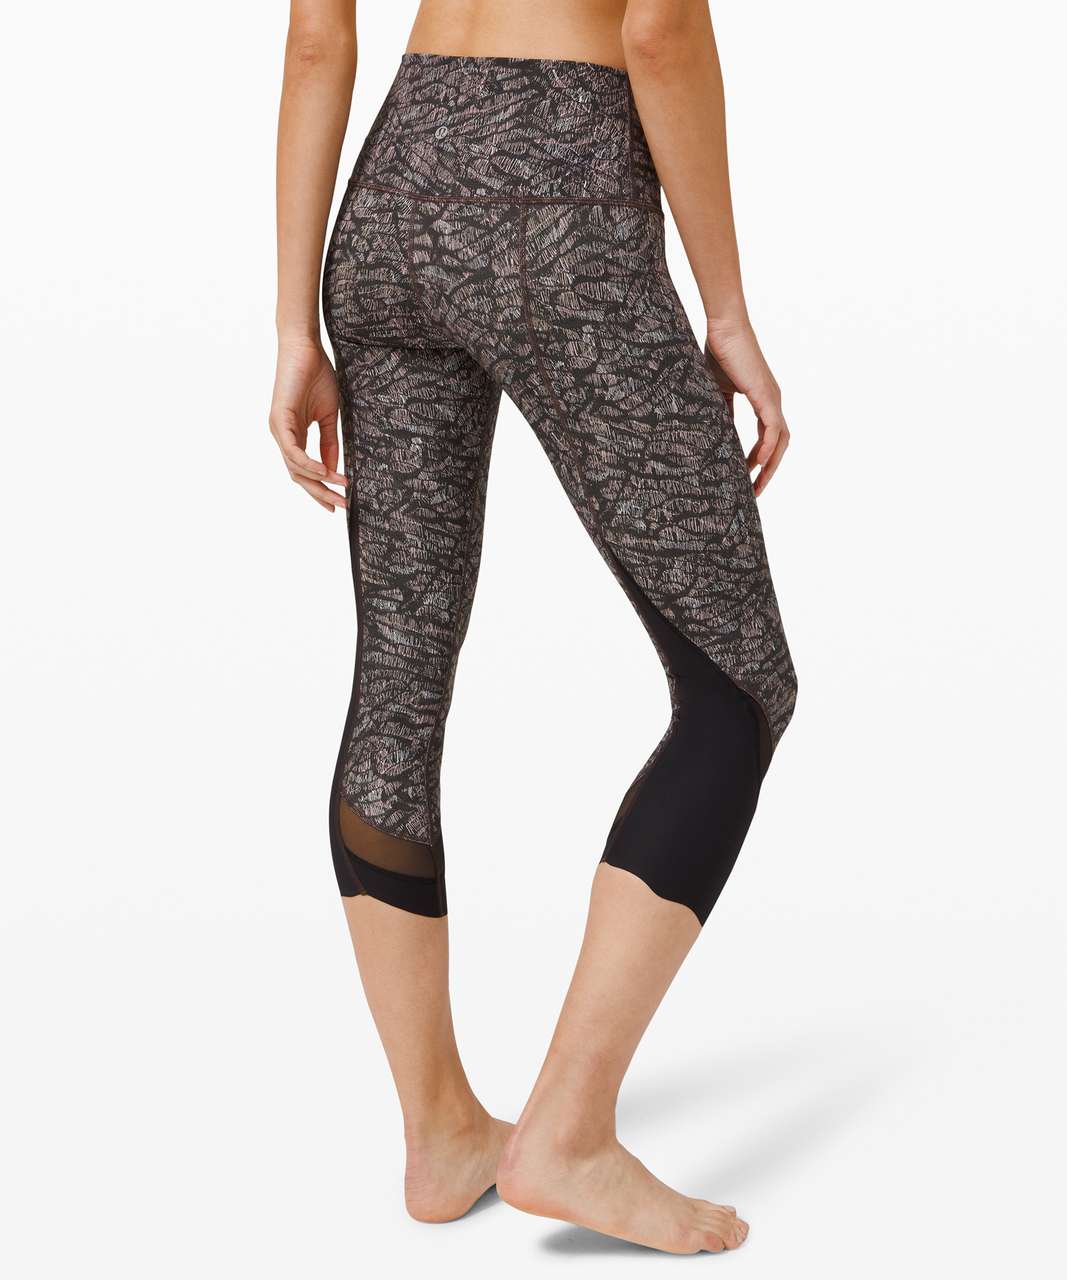 Lululemon Wunder Under Crop High-Rise *Roll Down Scallop Full-On Luxtreme 23" - Origami Lace Multi / Black